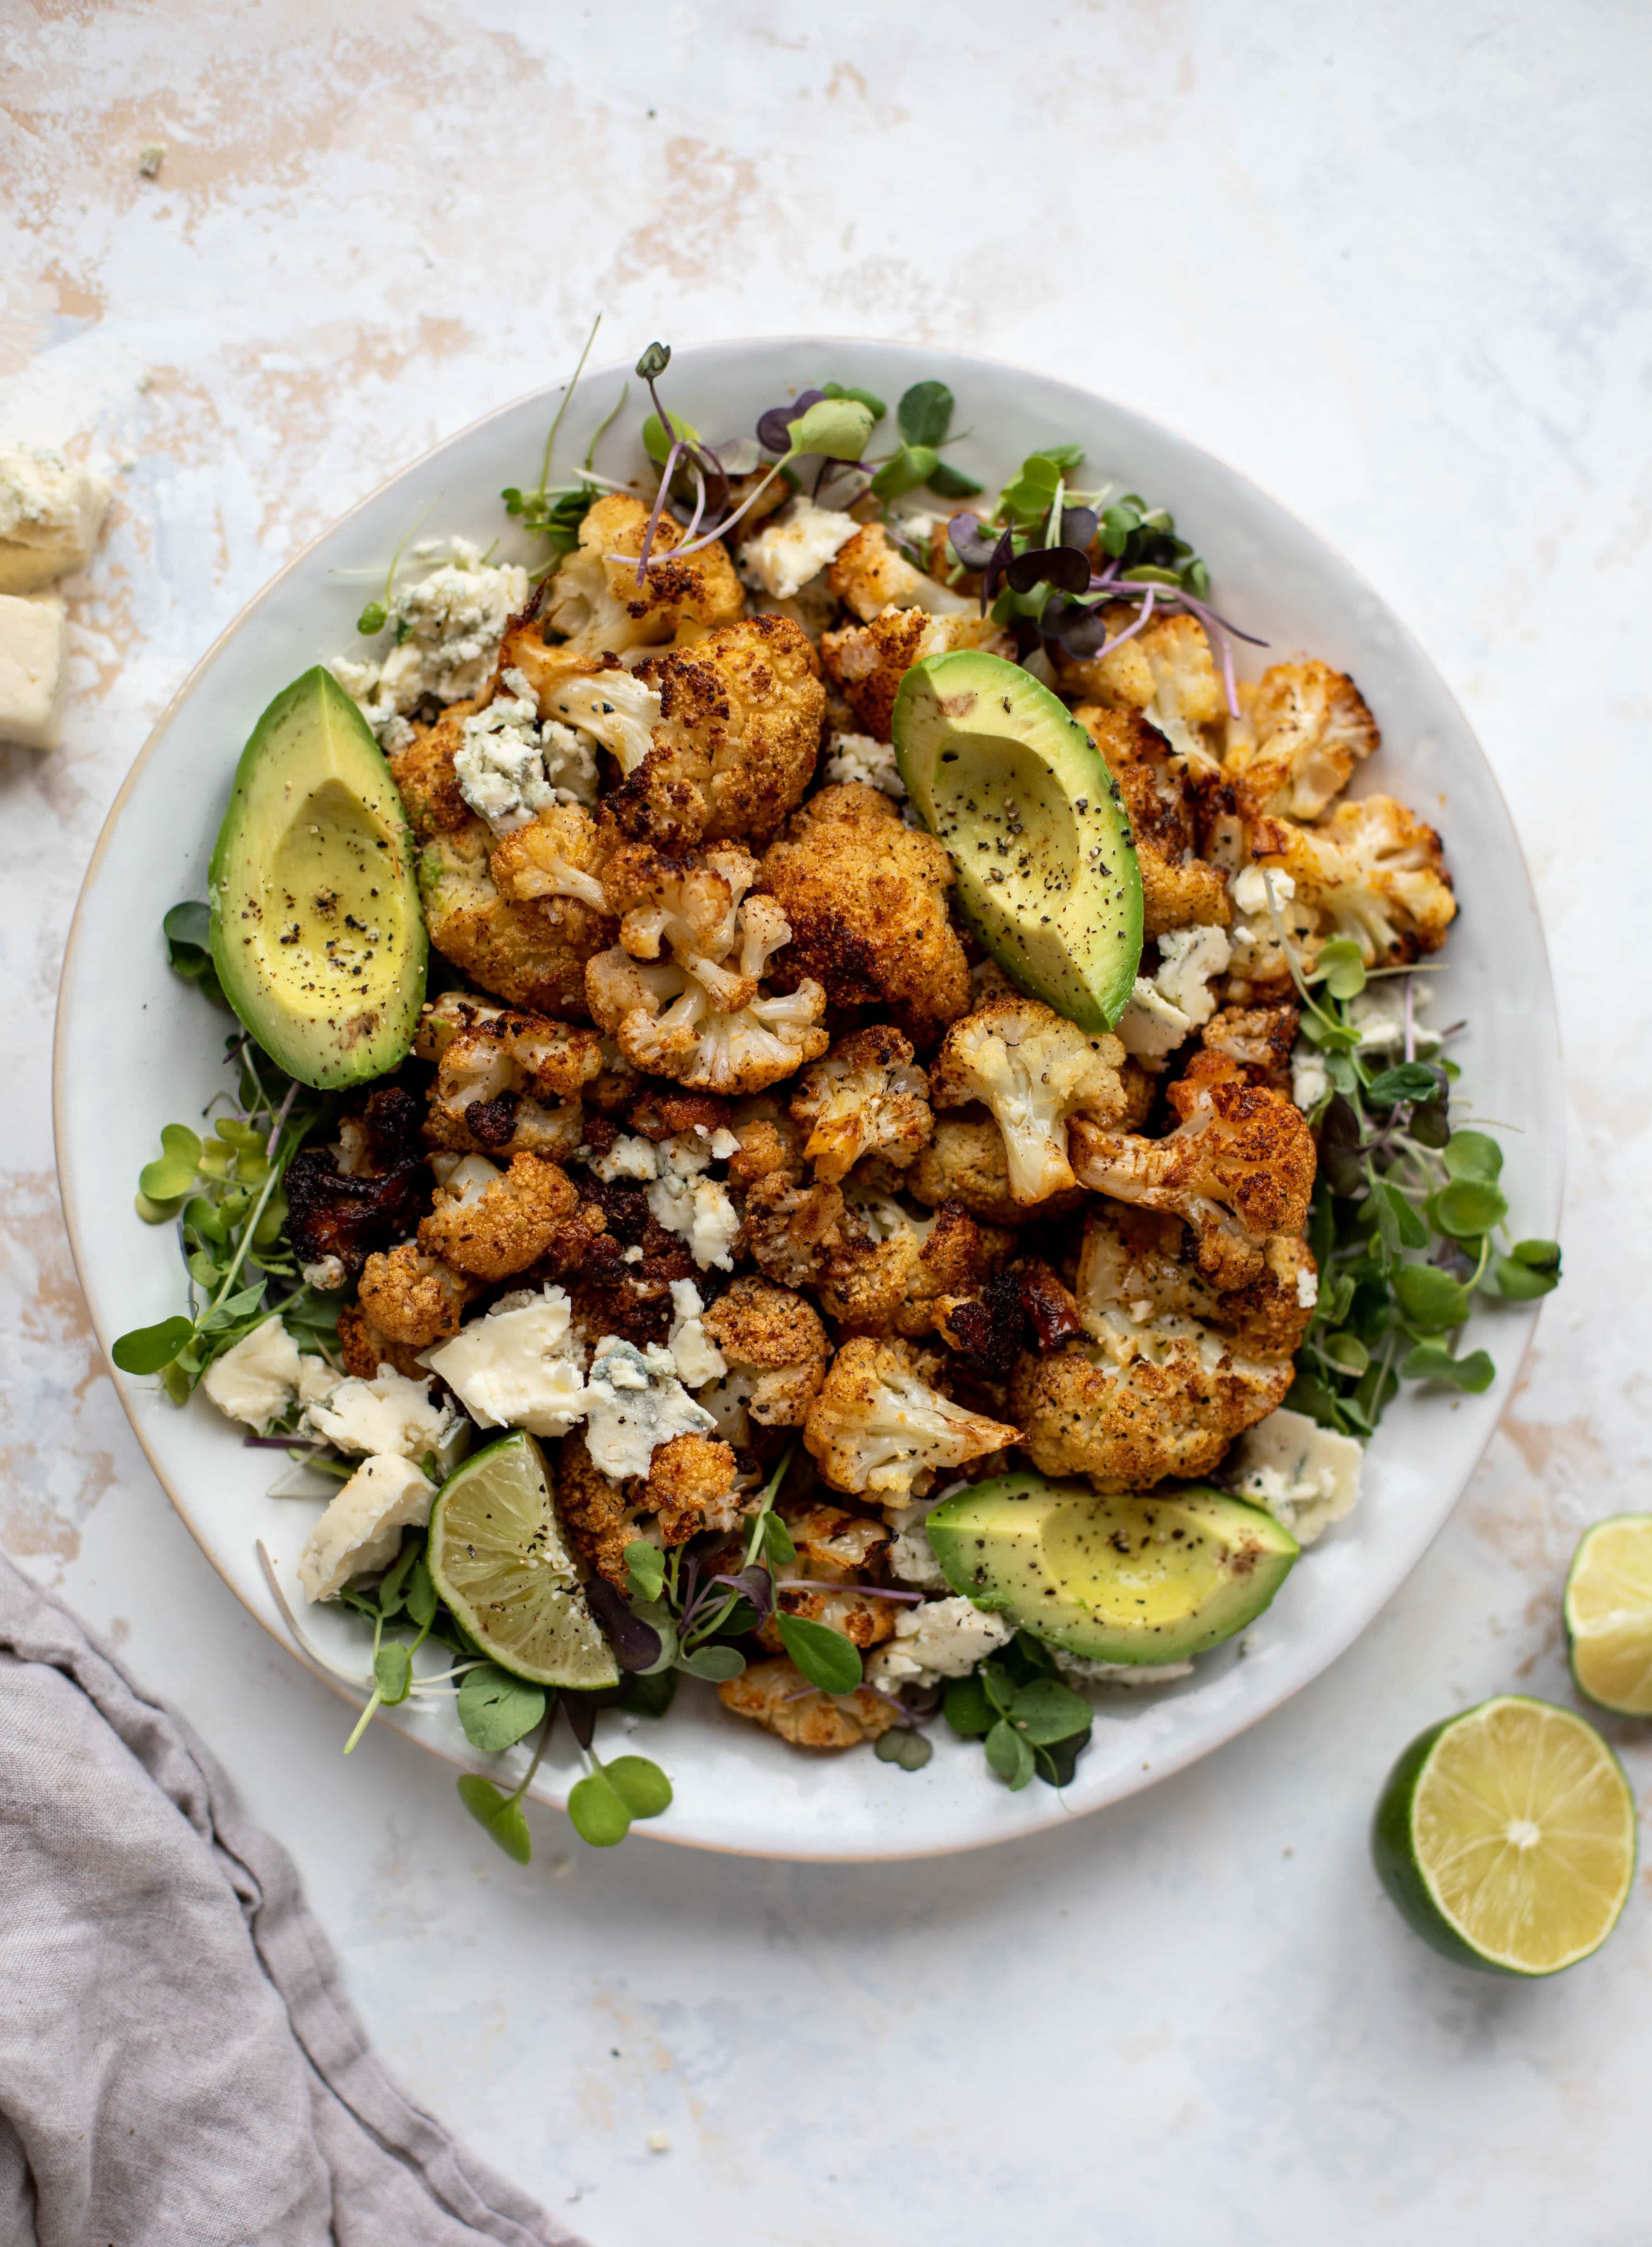 This crispy buffalo cauliflower is loaded with flavor! Serve with avocado and smoked blue cheese - you will want to eat this everyday!